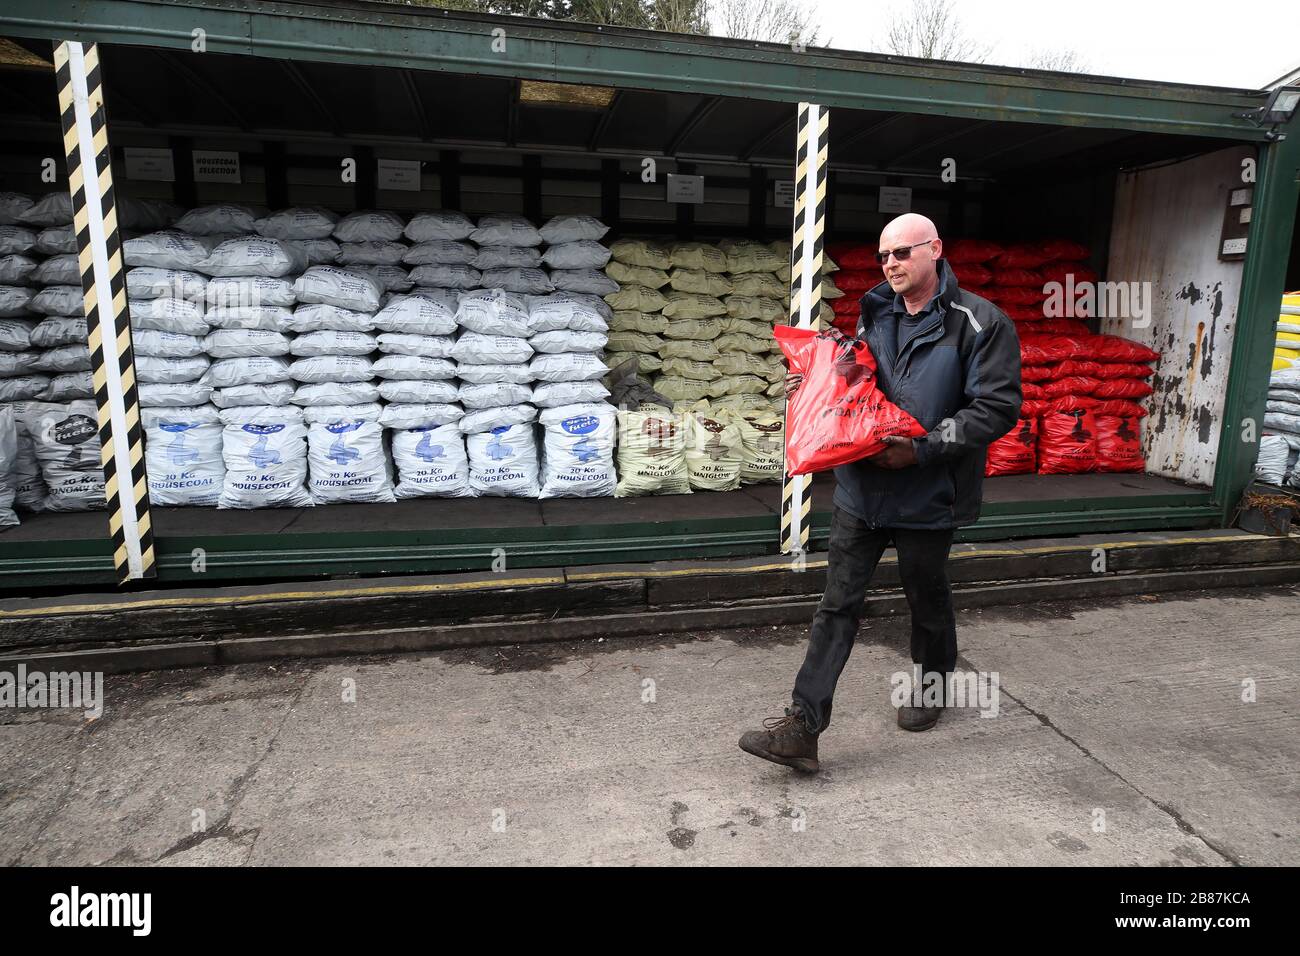 A man carrying a bag of coal at Seal Fuels in Bridgnorth, Shropshire, as the UK's coronavirus death toll reached 144 as of 1pm on Thursday, with around four in 10 of all deaths so far in London. Stock Photo